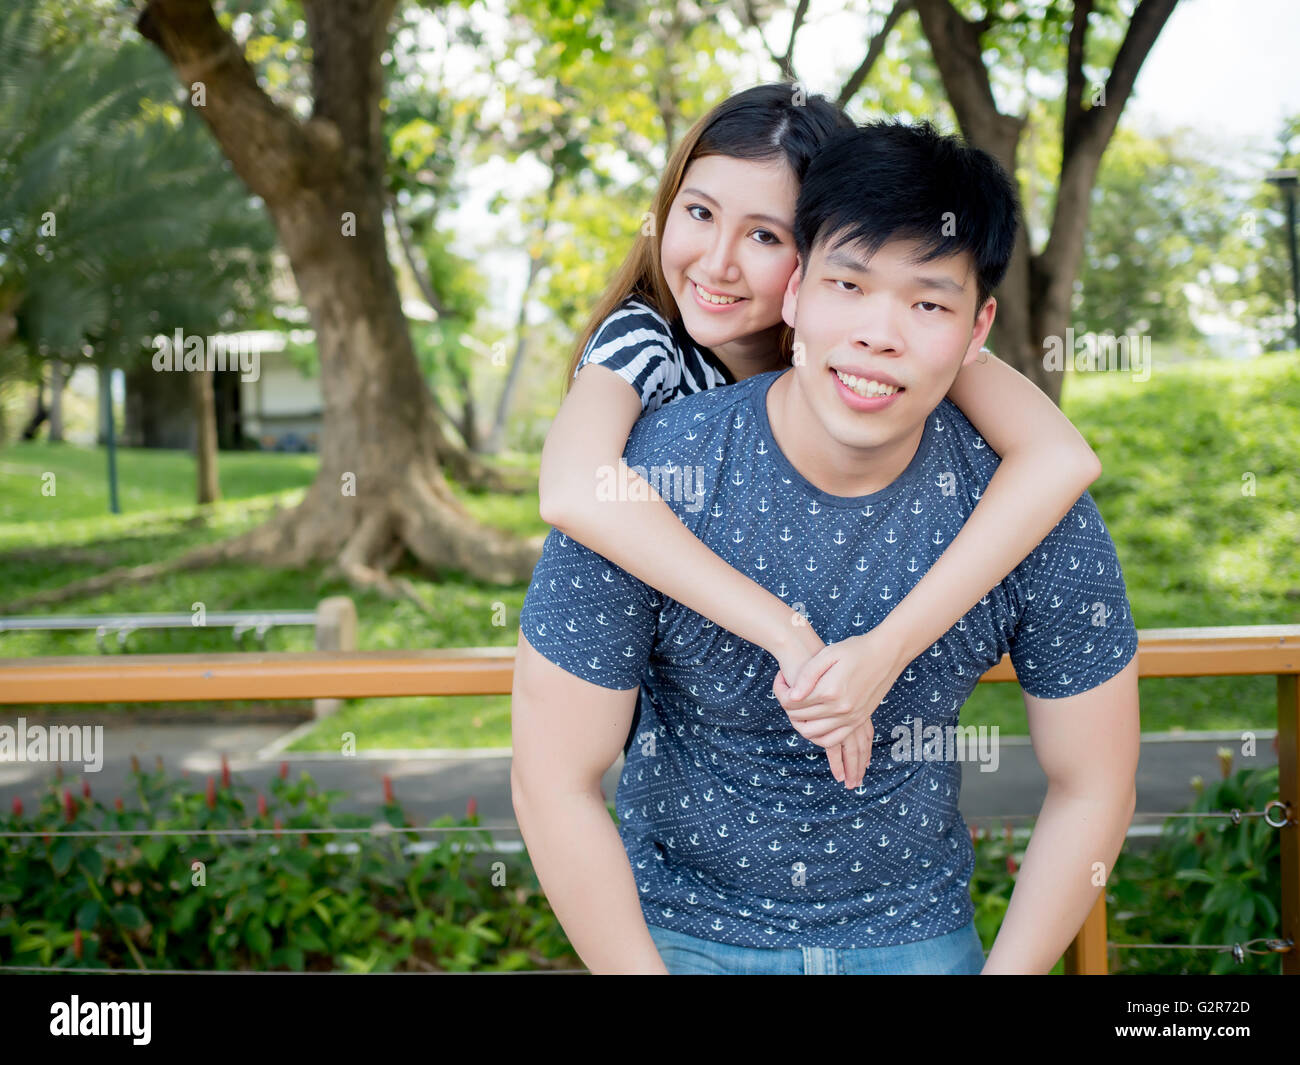 Young smiling Asian man and woman in relationship in outdoor park Stock Photo